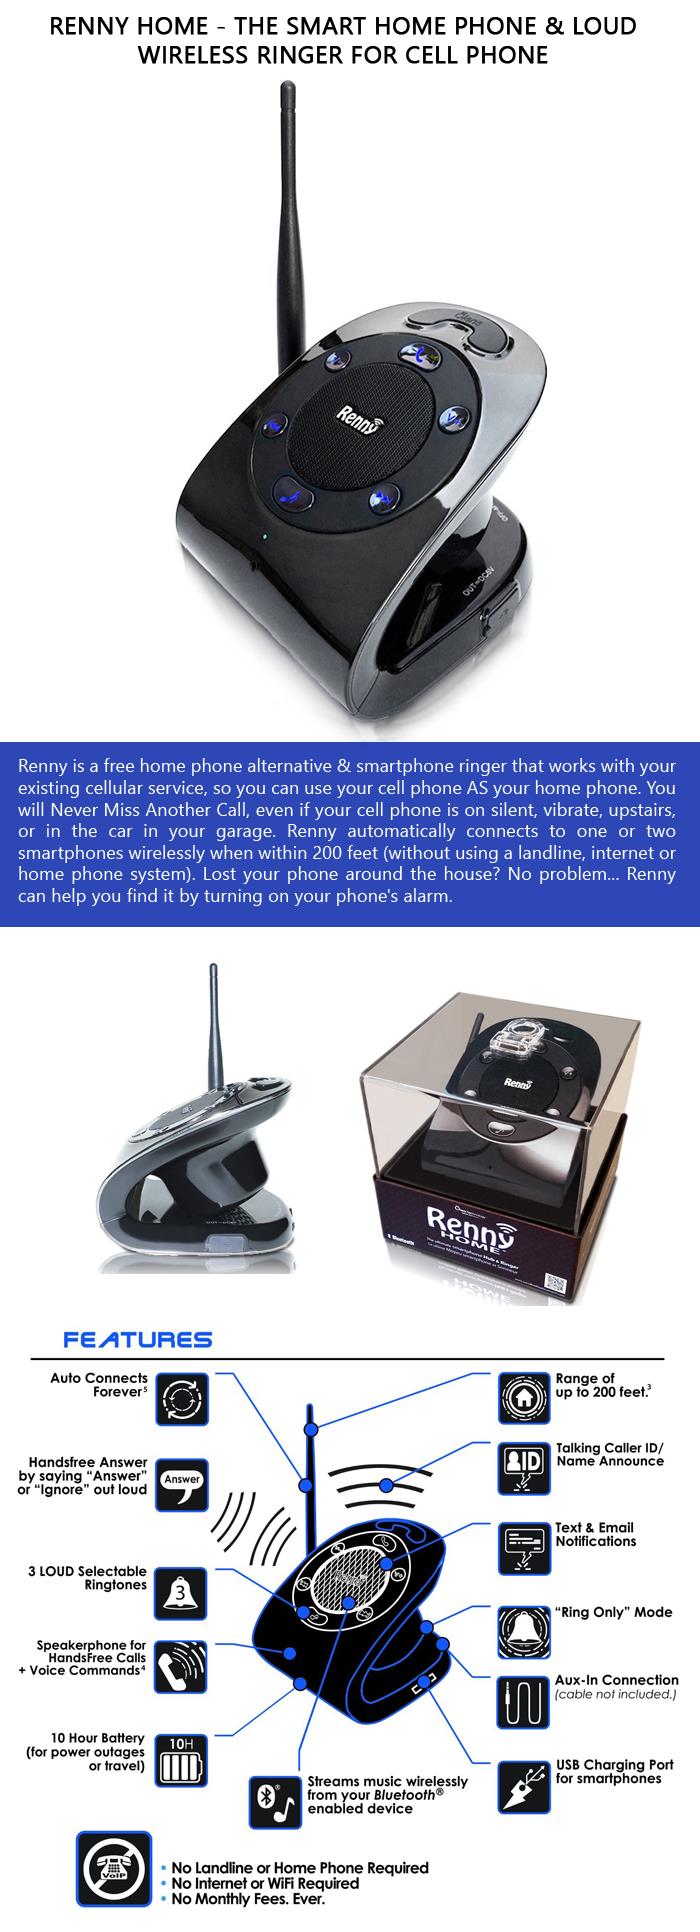 Renny HOME - The Smart Home Phone and Loud Wireless Ringer for Cell Phone